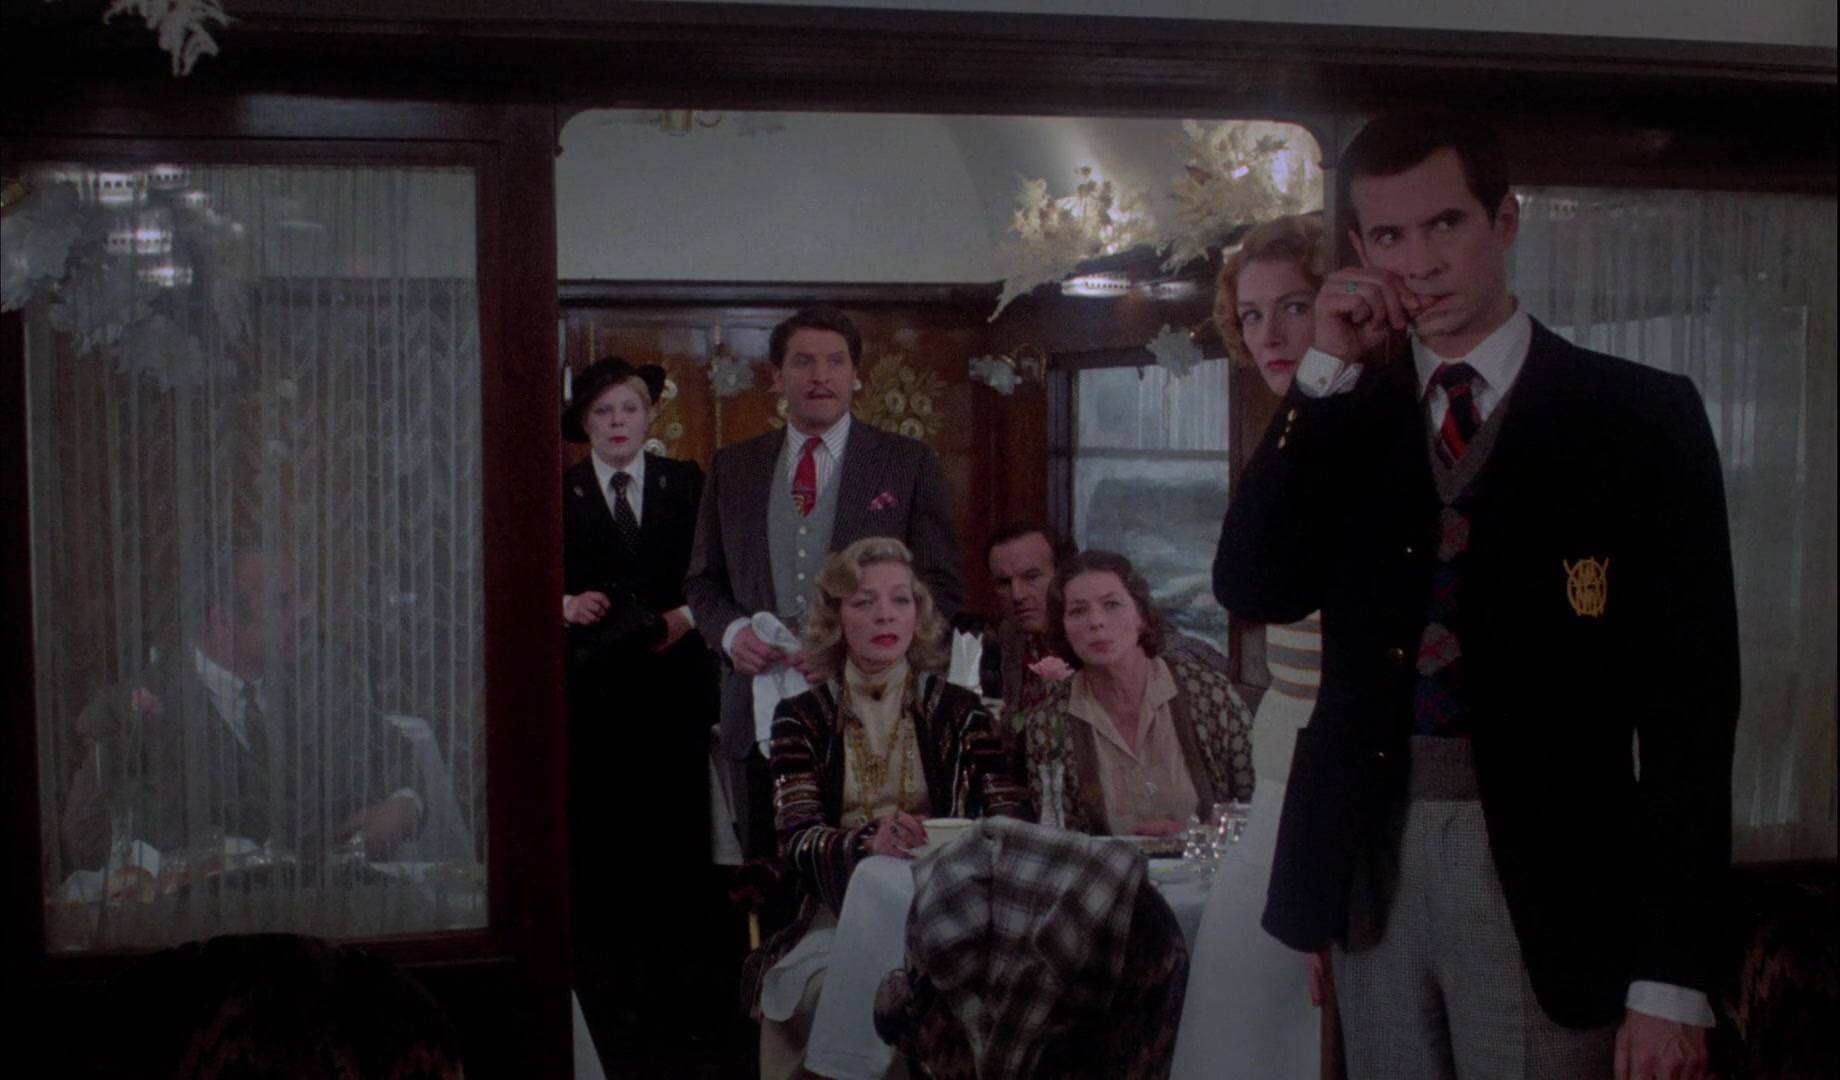 Mord im Orient Express (1974)